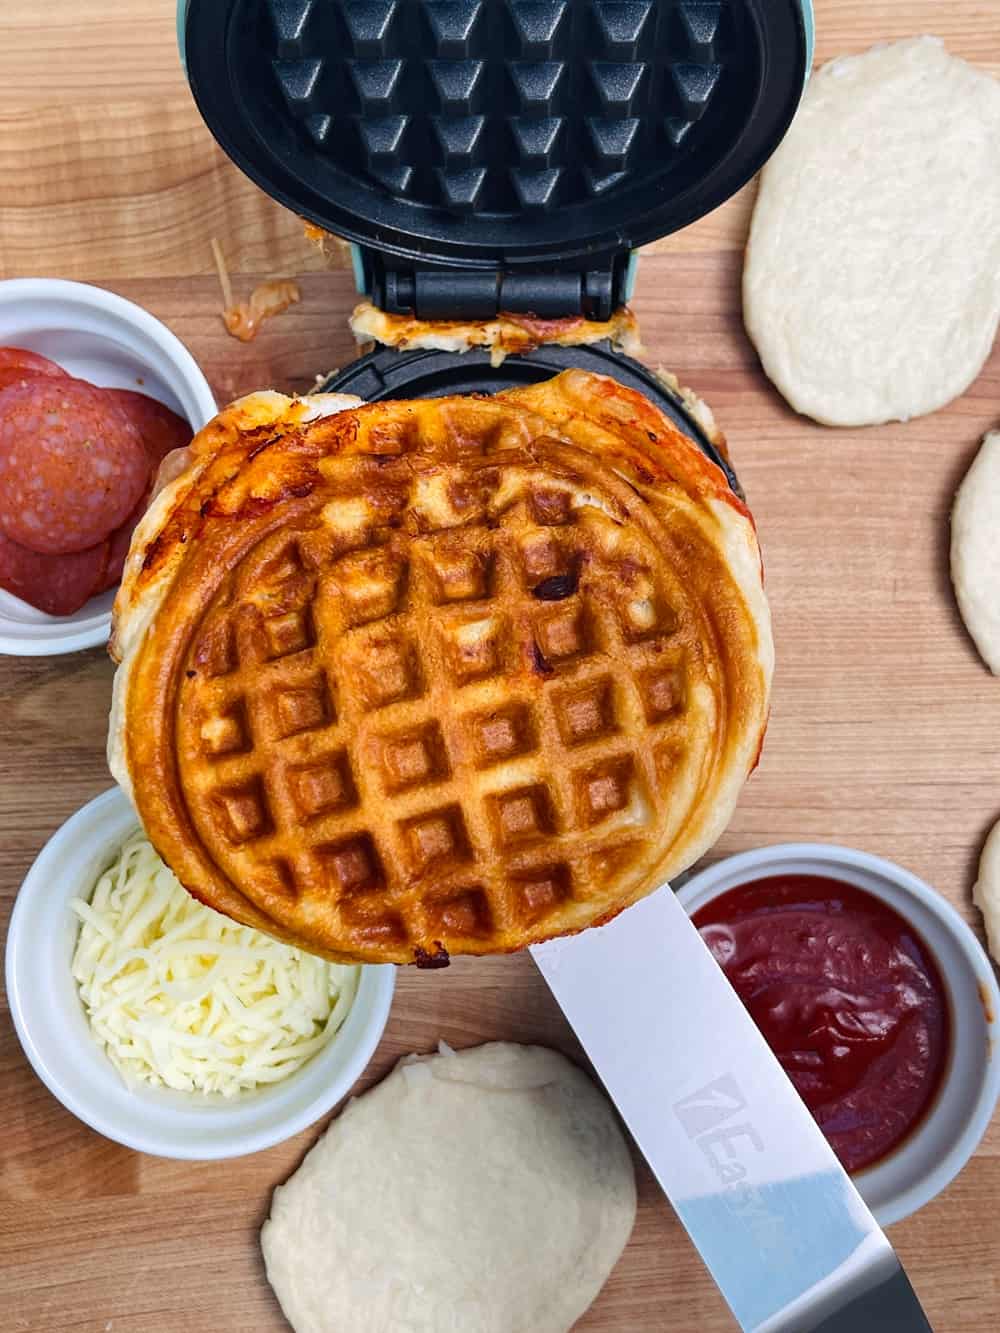 How To Make Pizza In A Waffle Iron